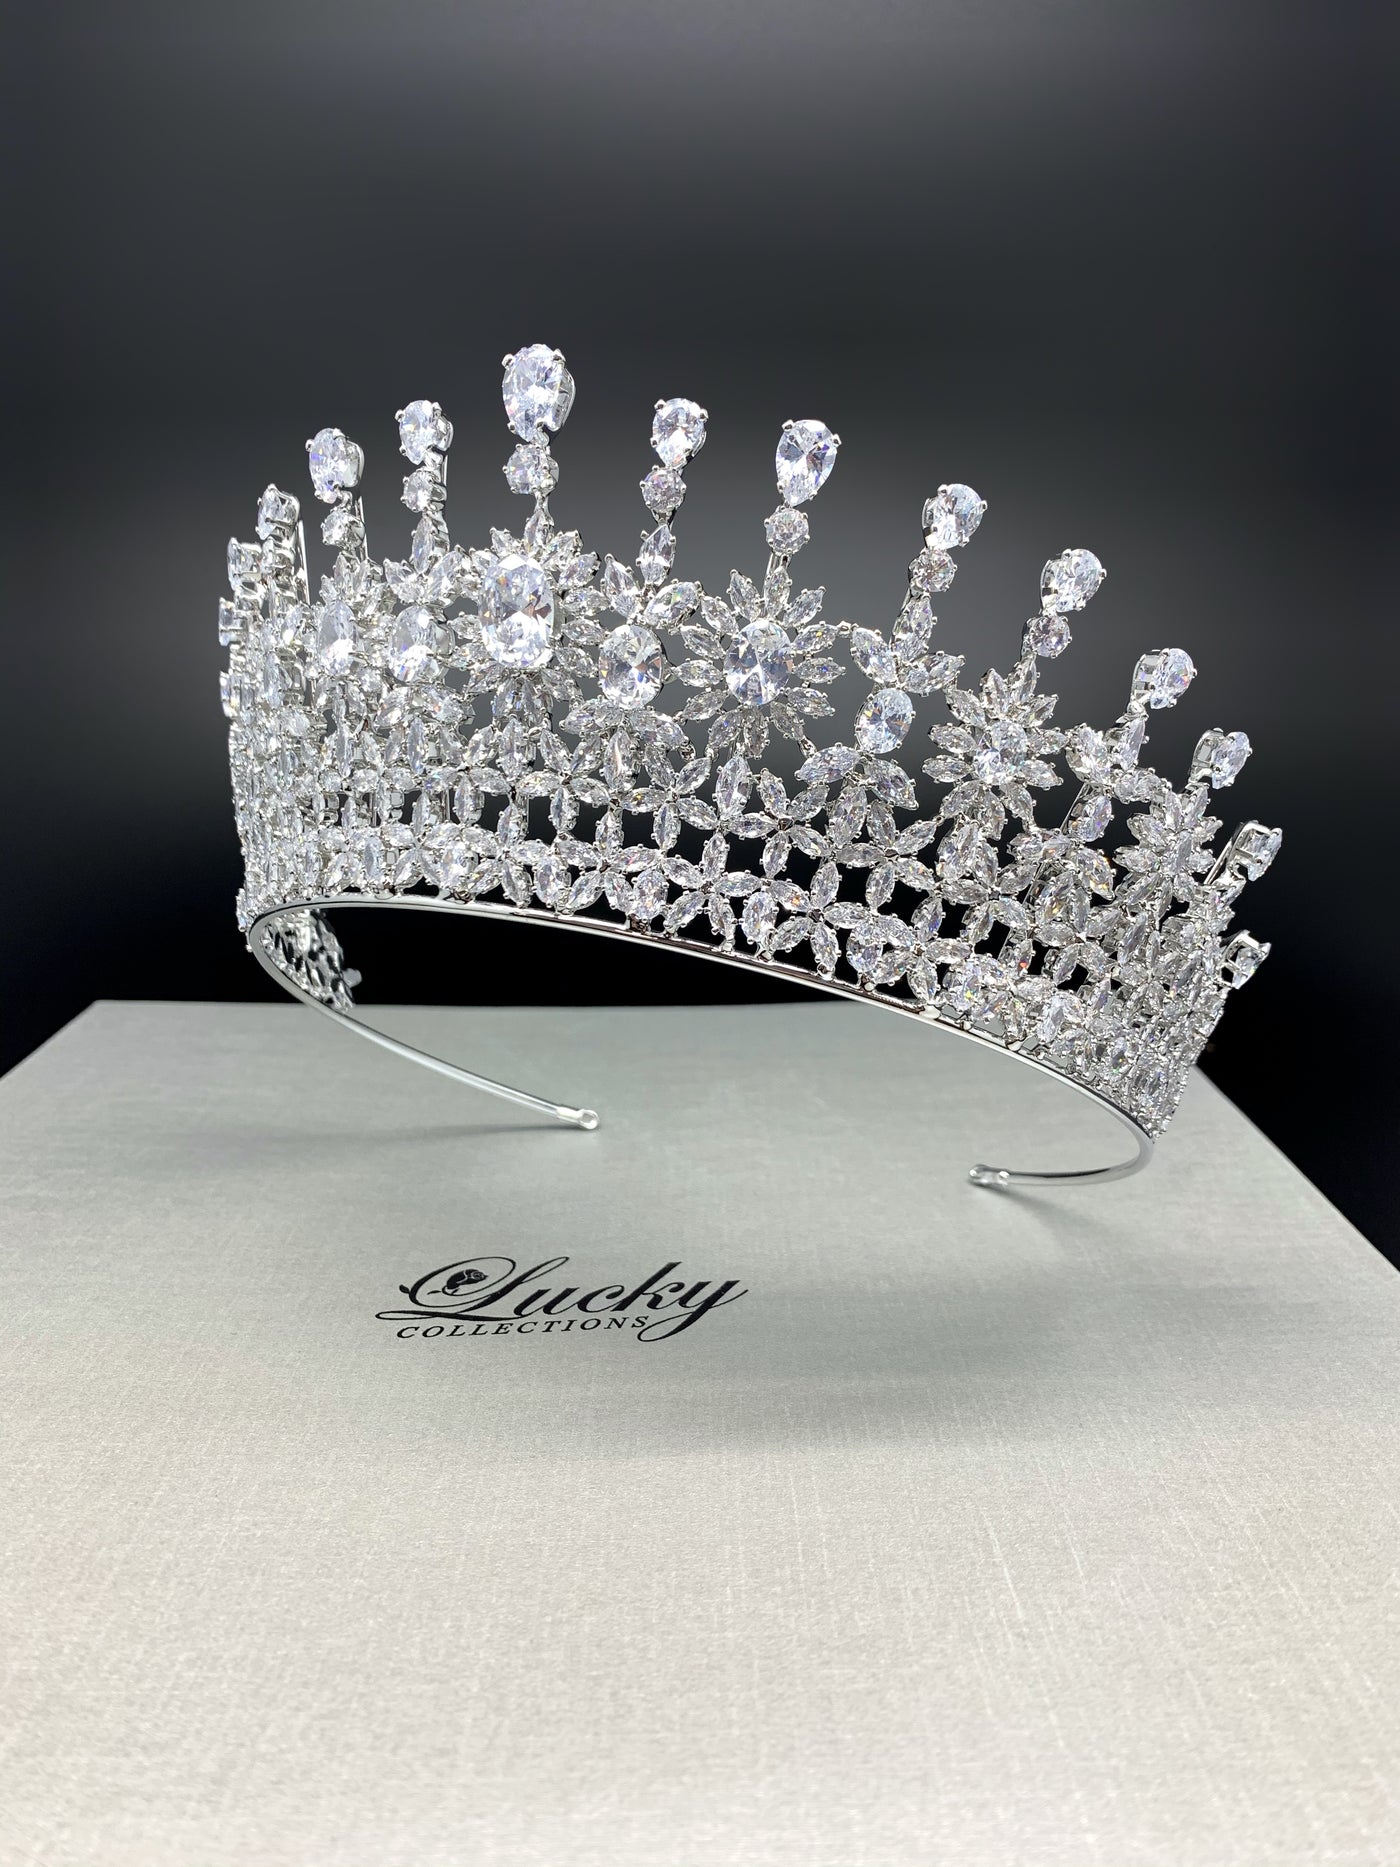 Tiara, Zirconia, 3 Inch Design for Queen of All Occasions by Lucky Collections ™